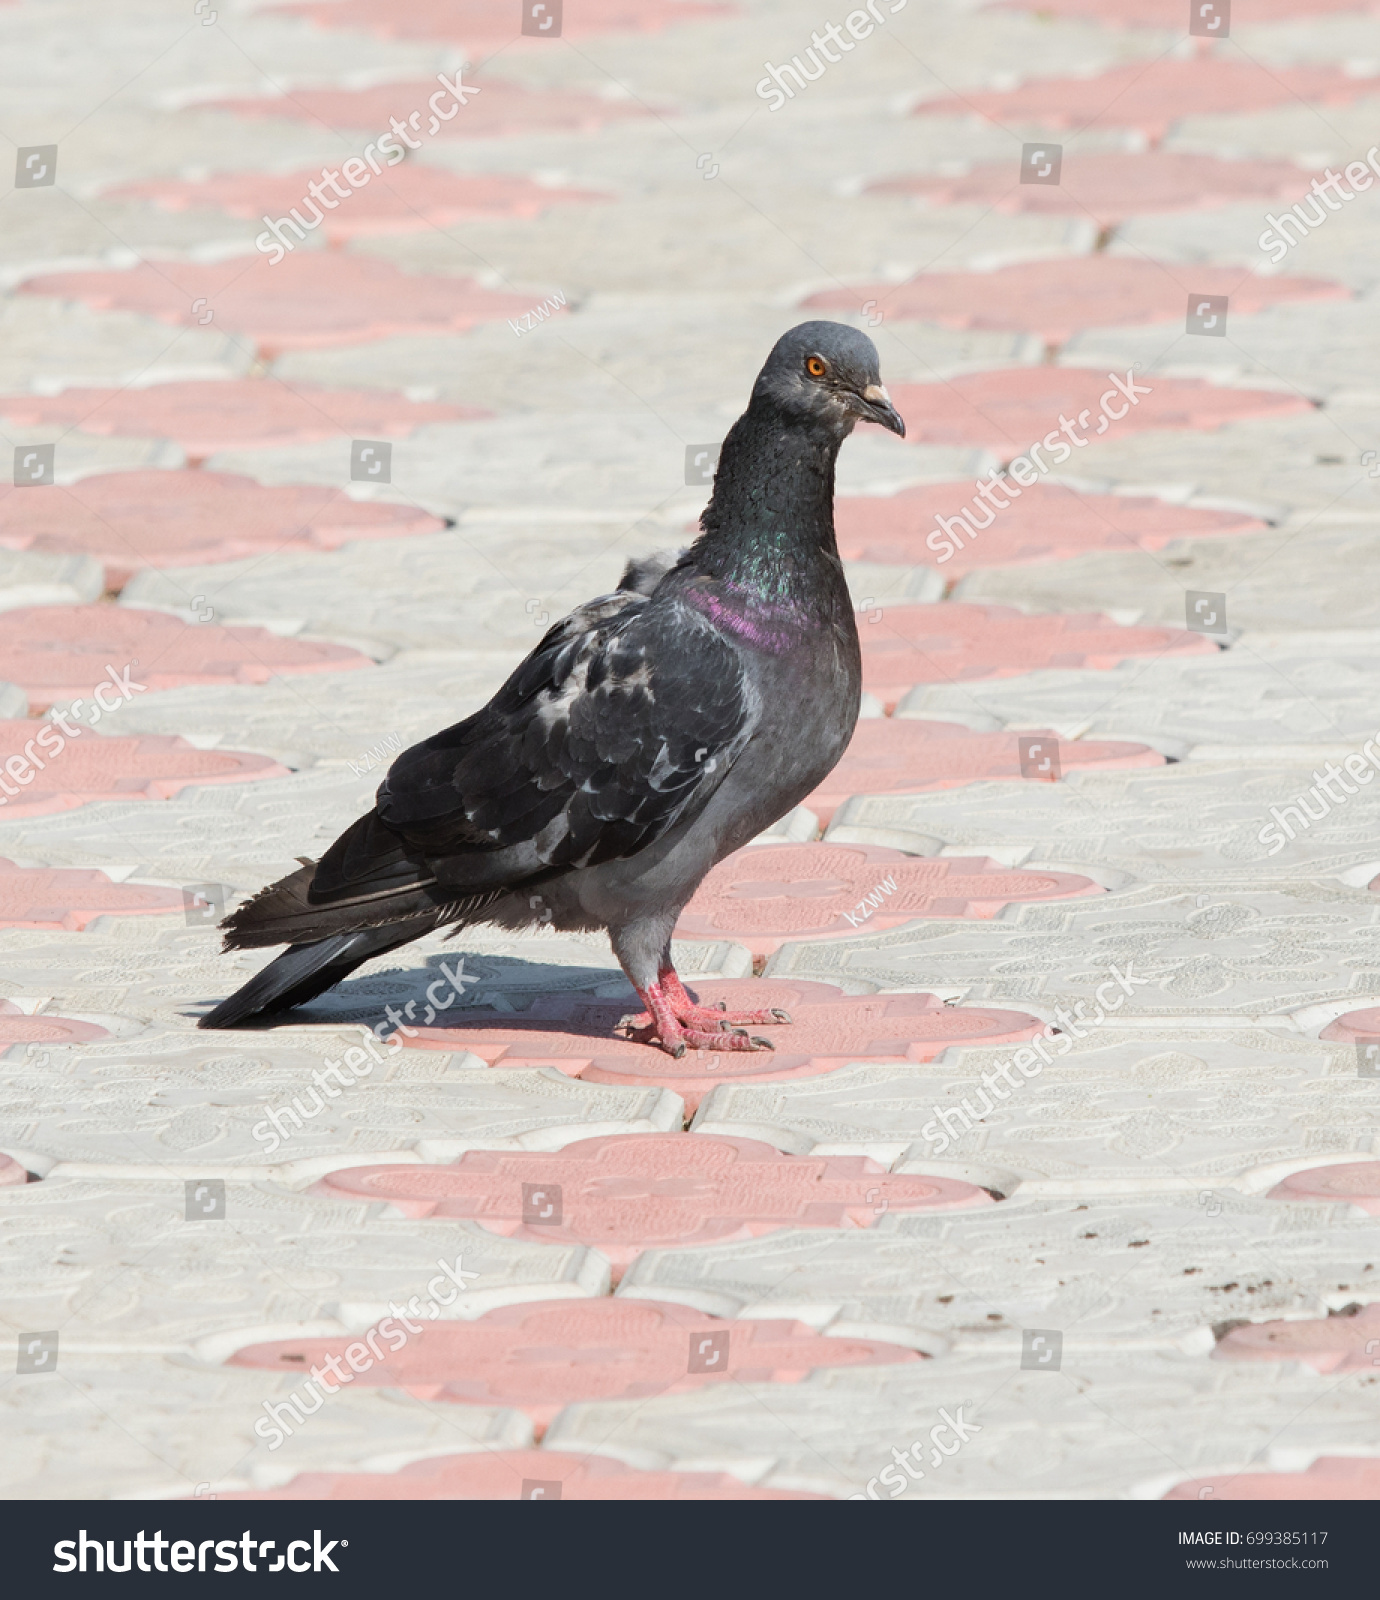 Pigeon in the pavement #699385117